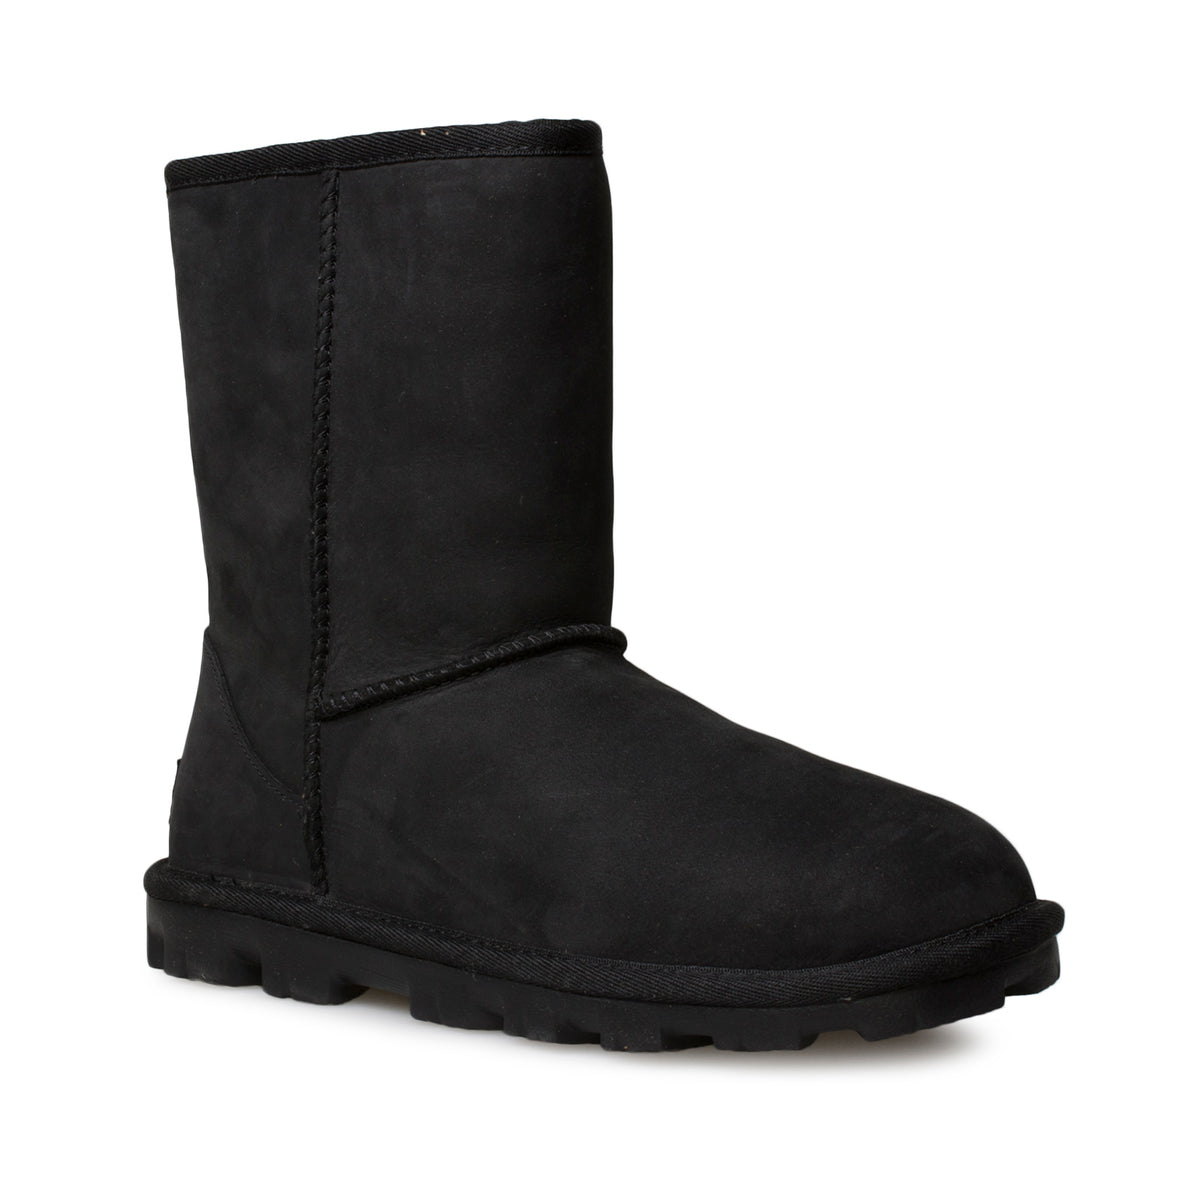 UGG Essential Short Leather Black Boots - Women's – MyCozyBoots